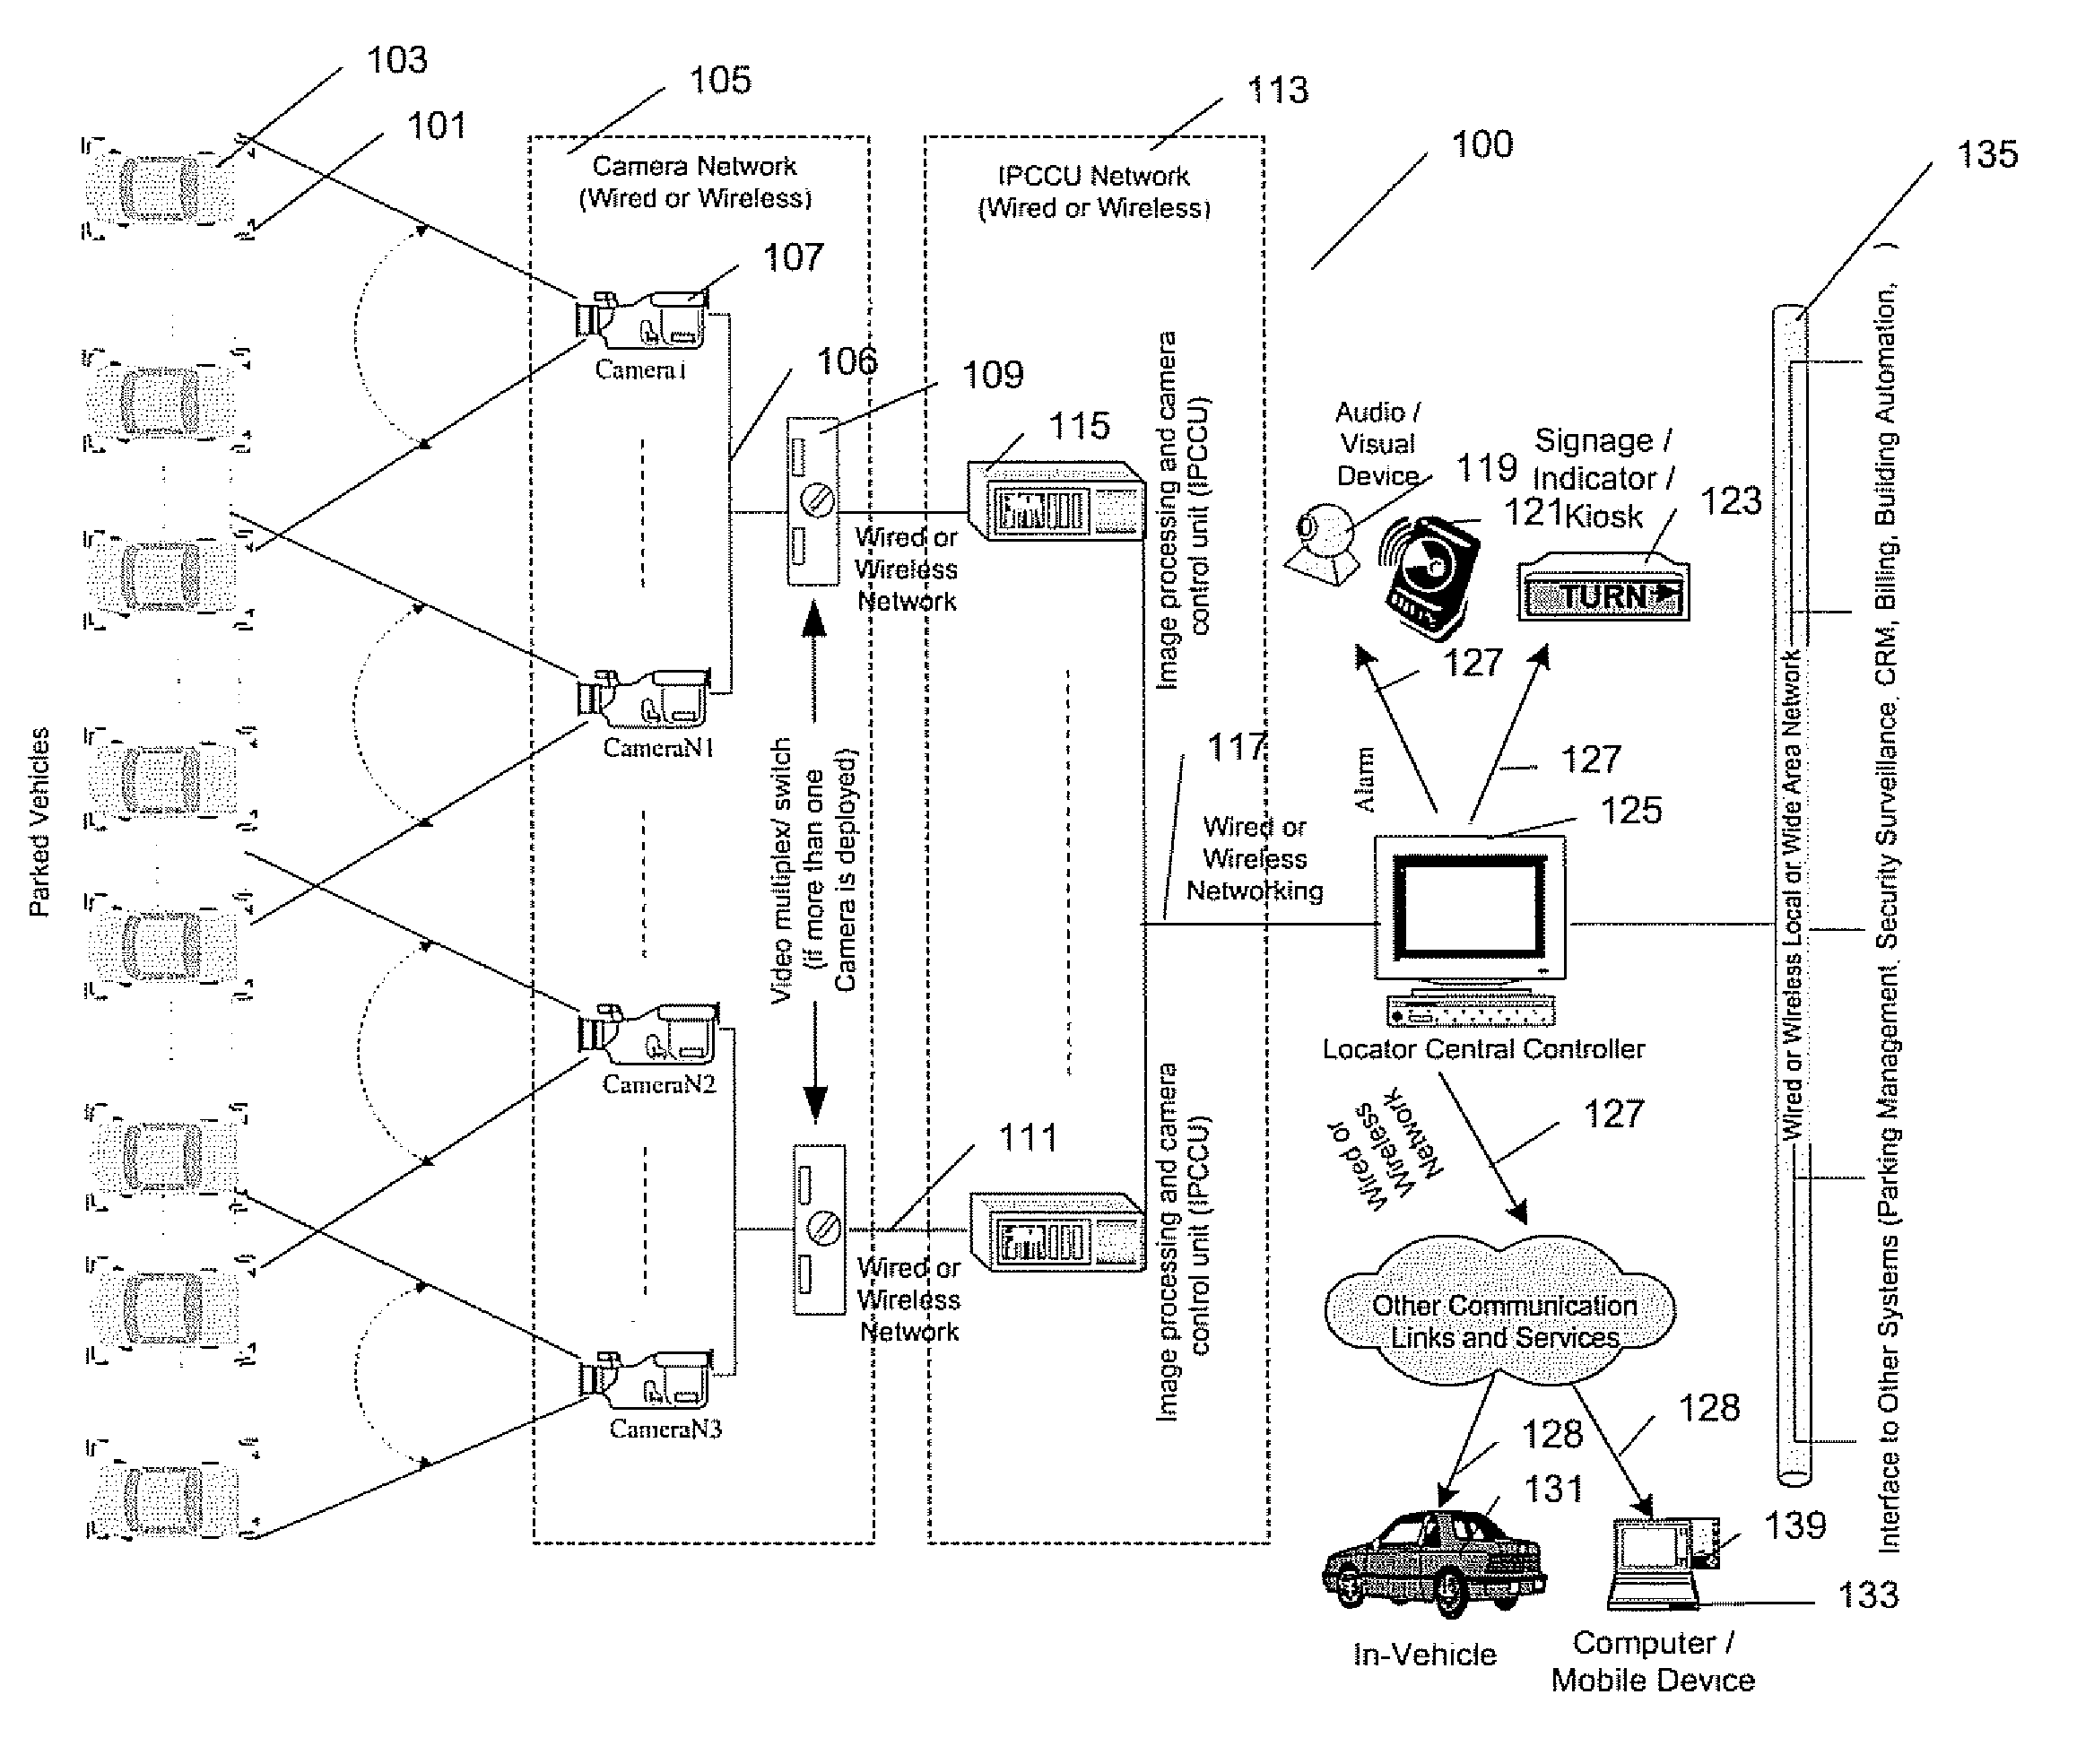 Apparatus And Method For Locating, Identifying And Tracking Vehicles In A Parking Area